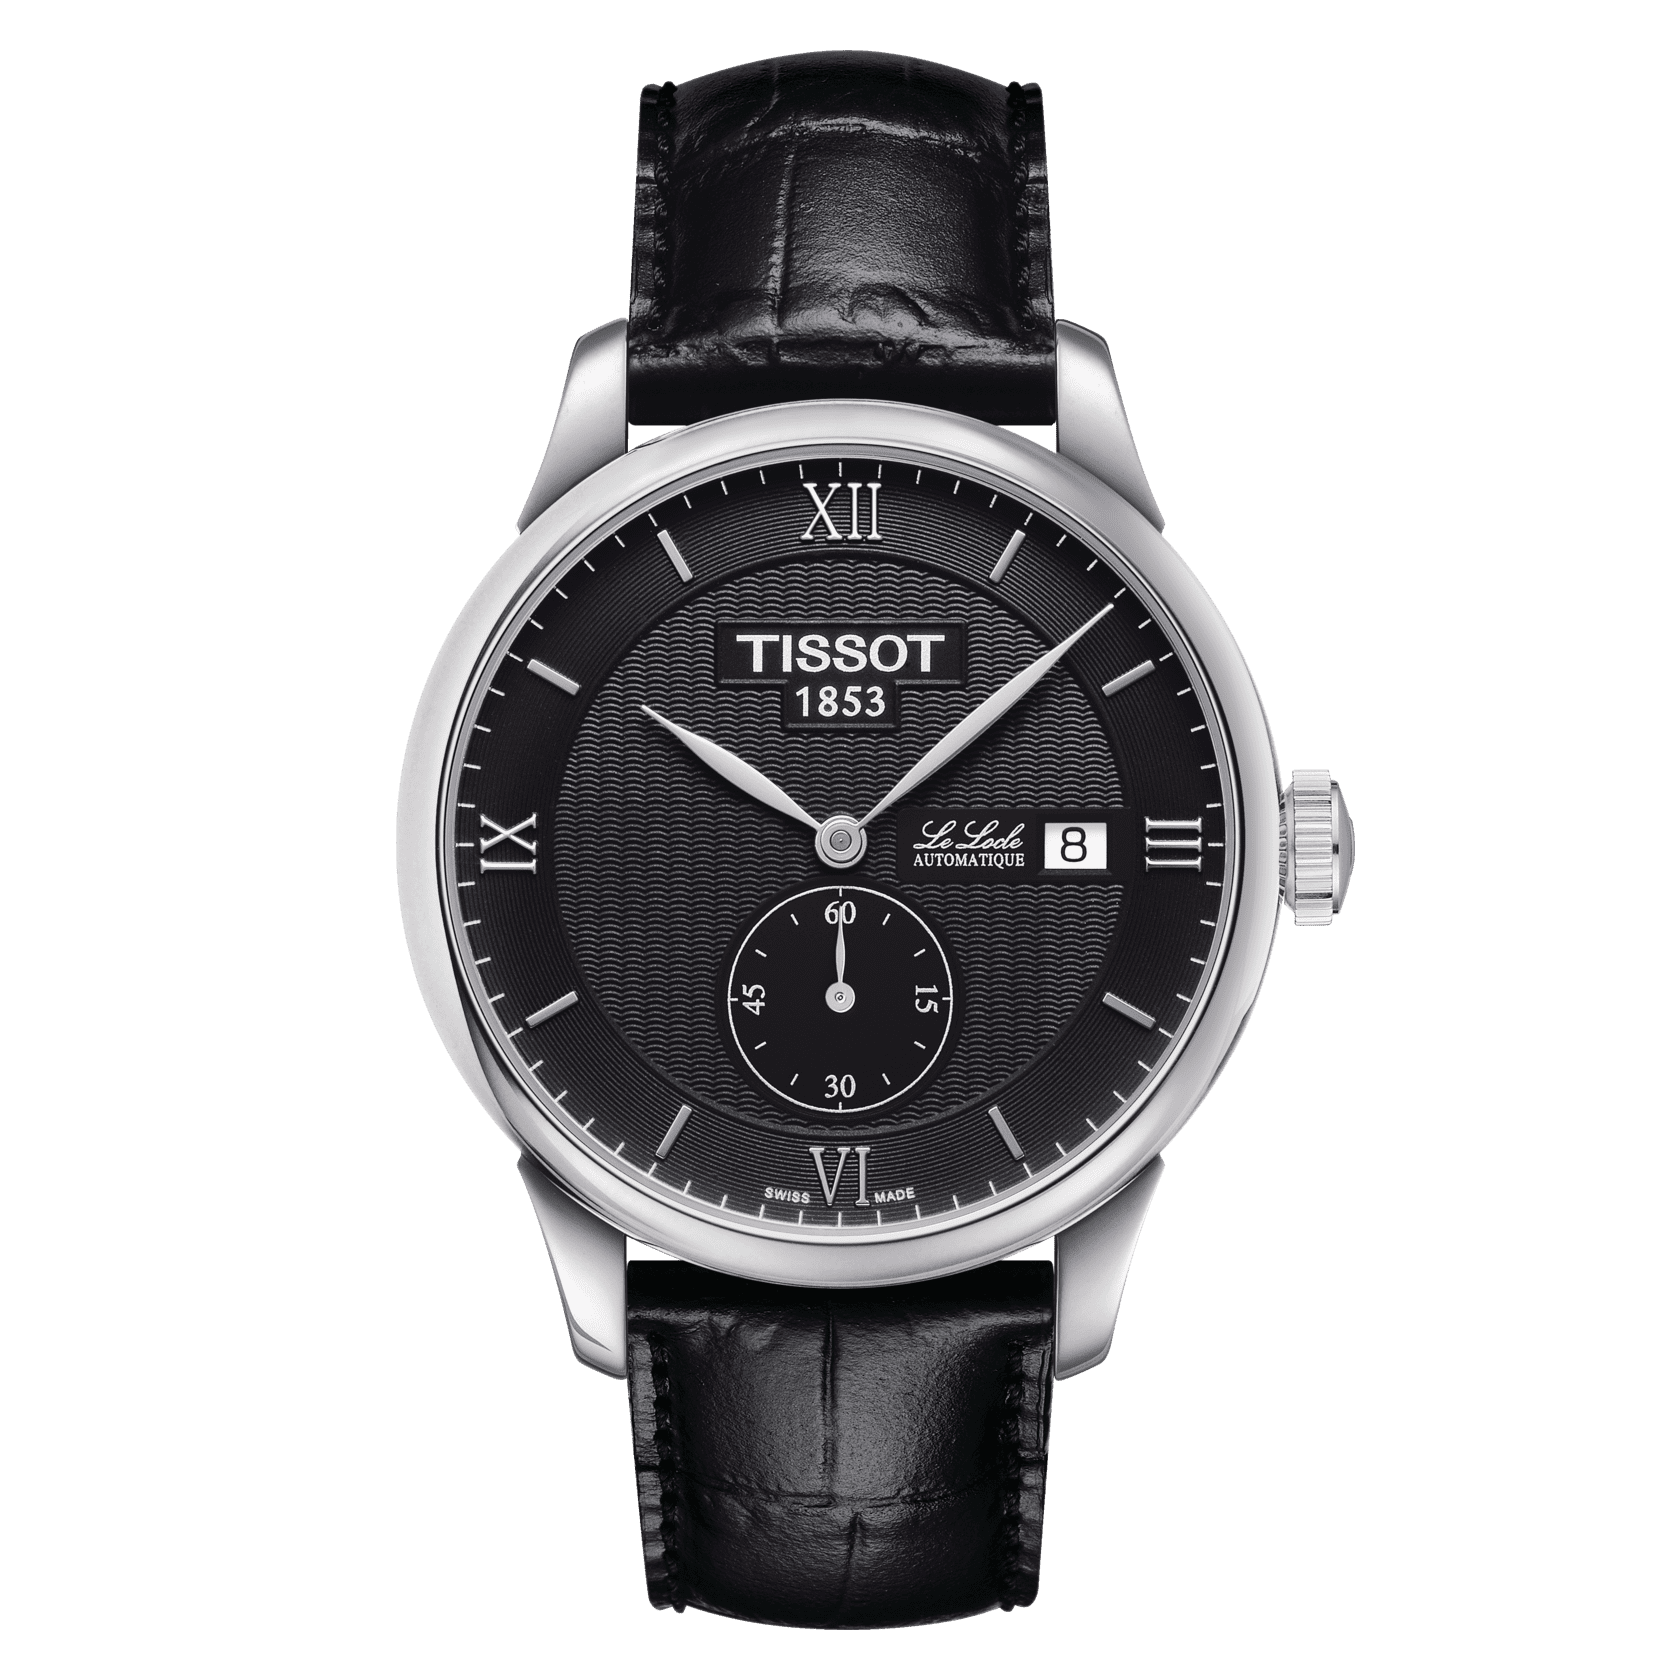 Replica Omega Watches Sites